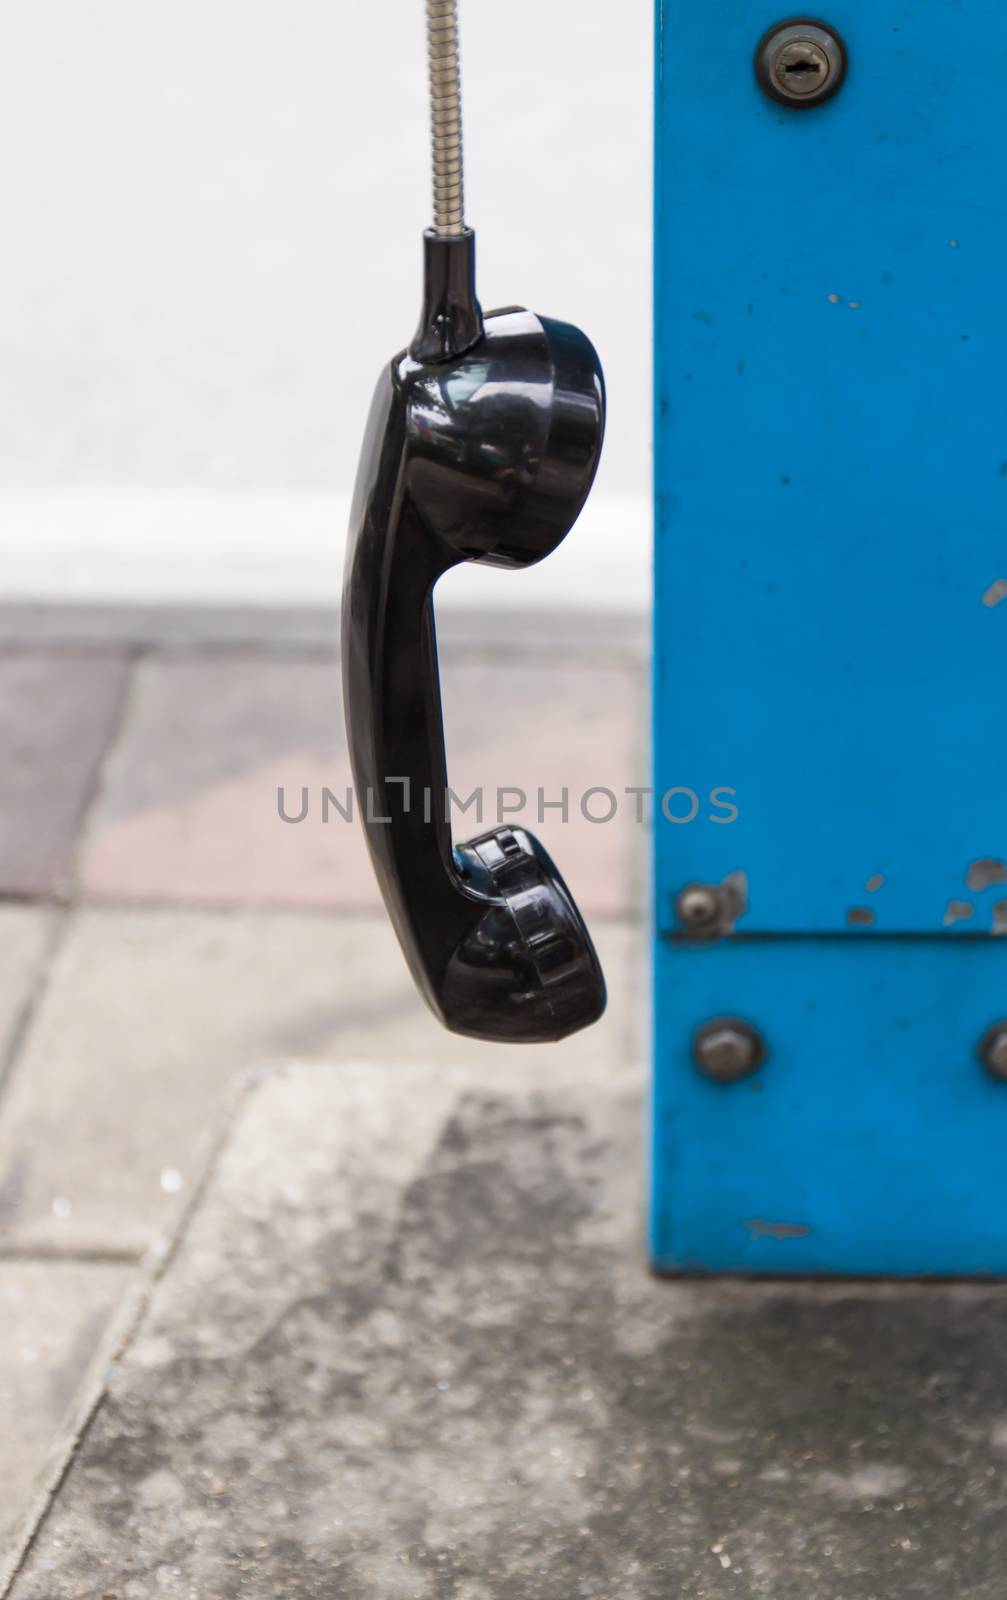 One black handset hanging in a row by photo2life